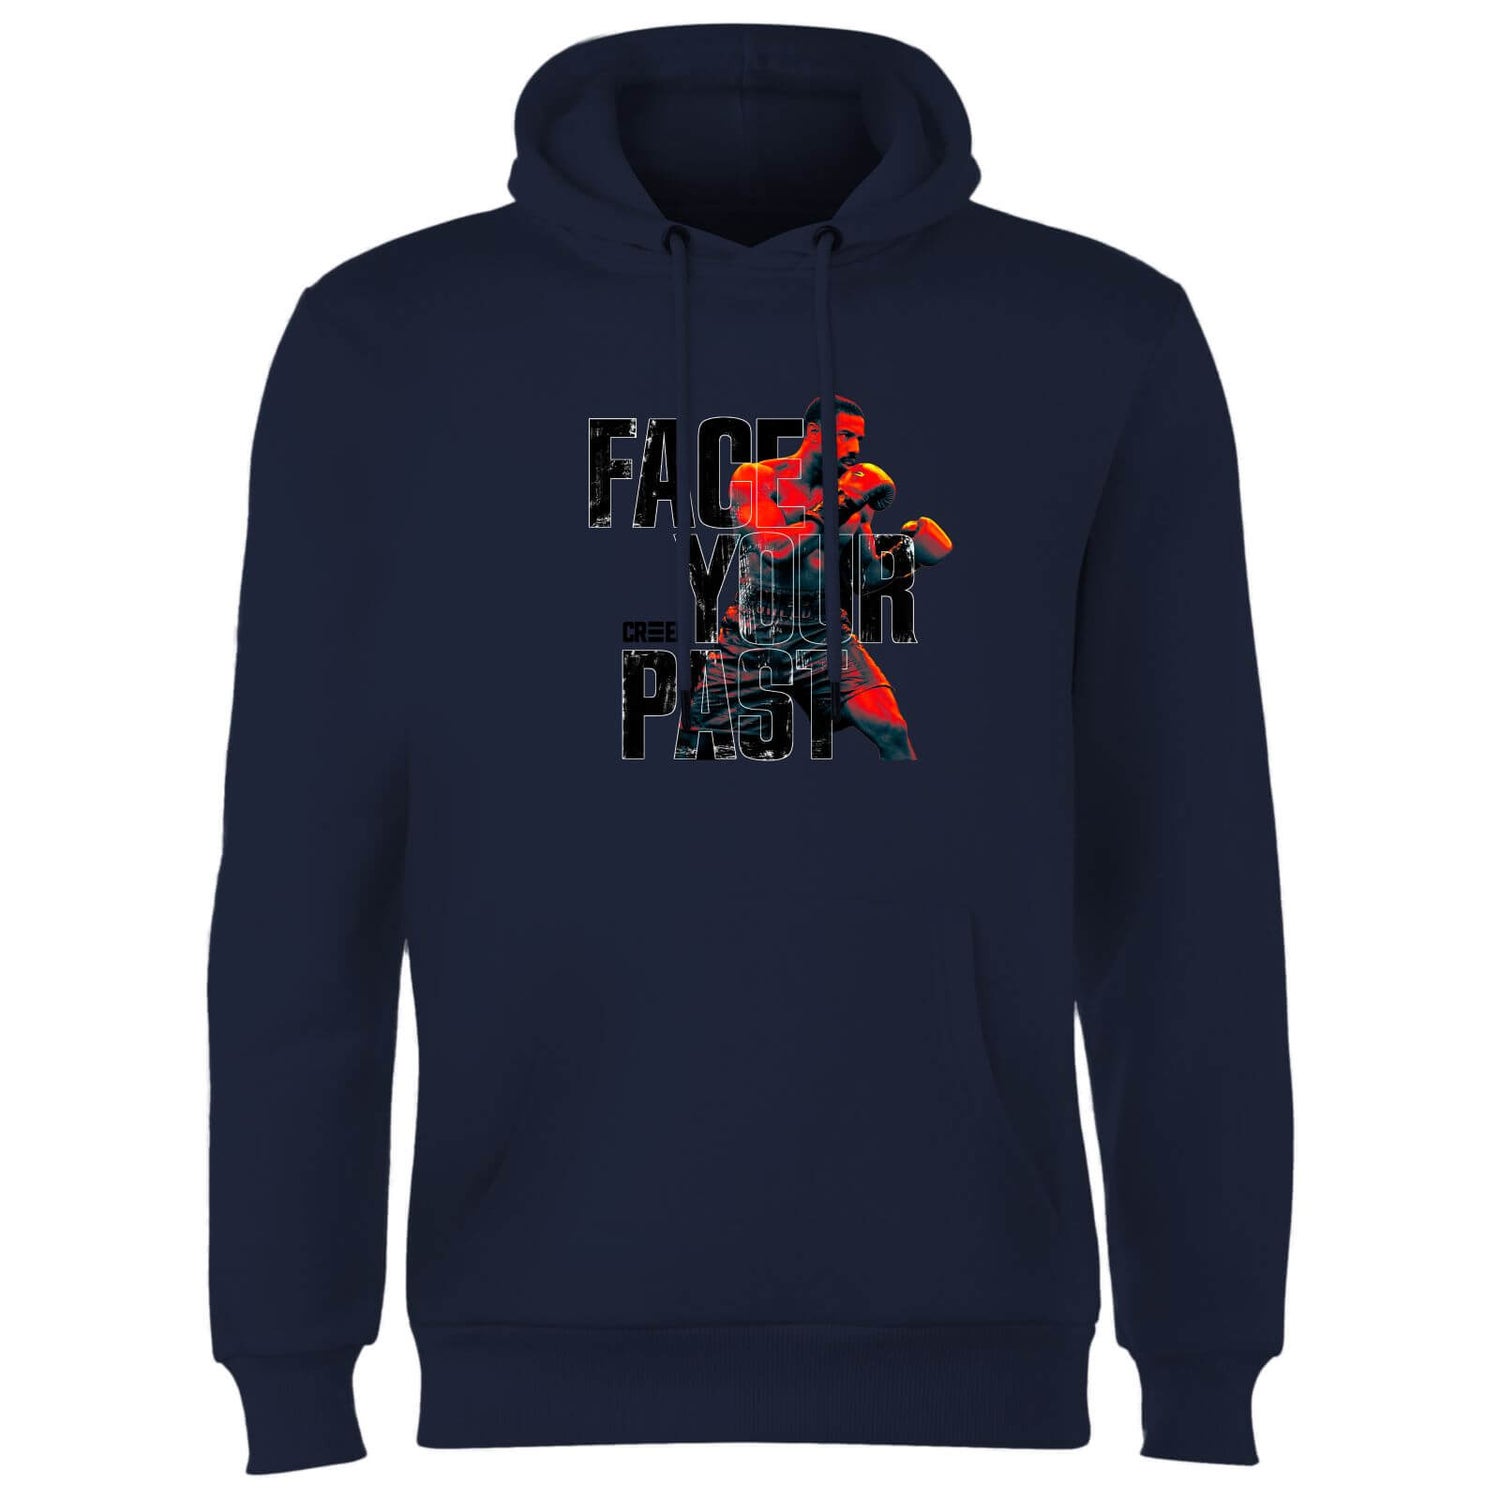 Creed Face Your Past Hoodie - Navy - S